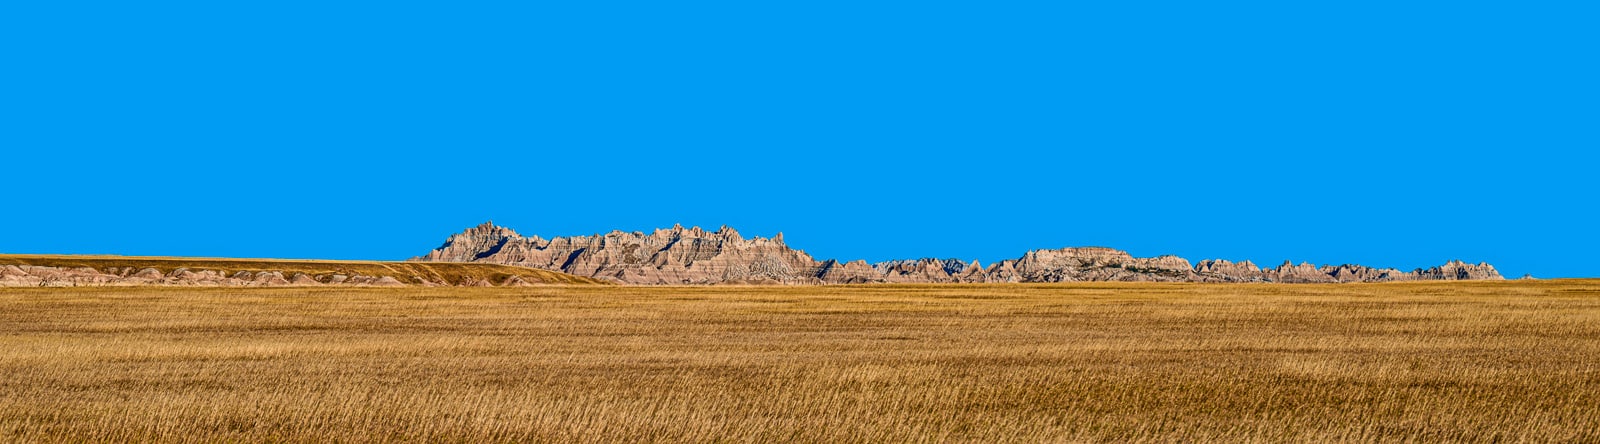 This panorama frames a portion of one of the most famous landmarks in Badlands Natiobnal Park: the Wall. The Wall is a heavily eroded sedementary landscape that exemplified the term badlands. It is roughly sixty miles long and a mile or two wide. In the foregroud is a swath of tallgrass prairie.